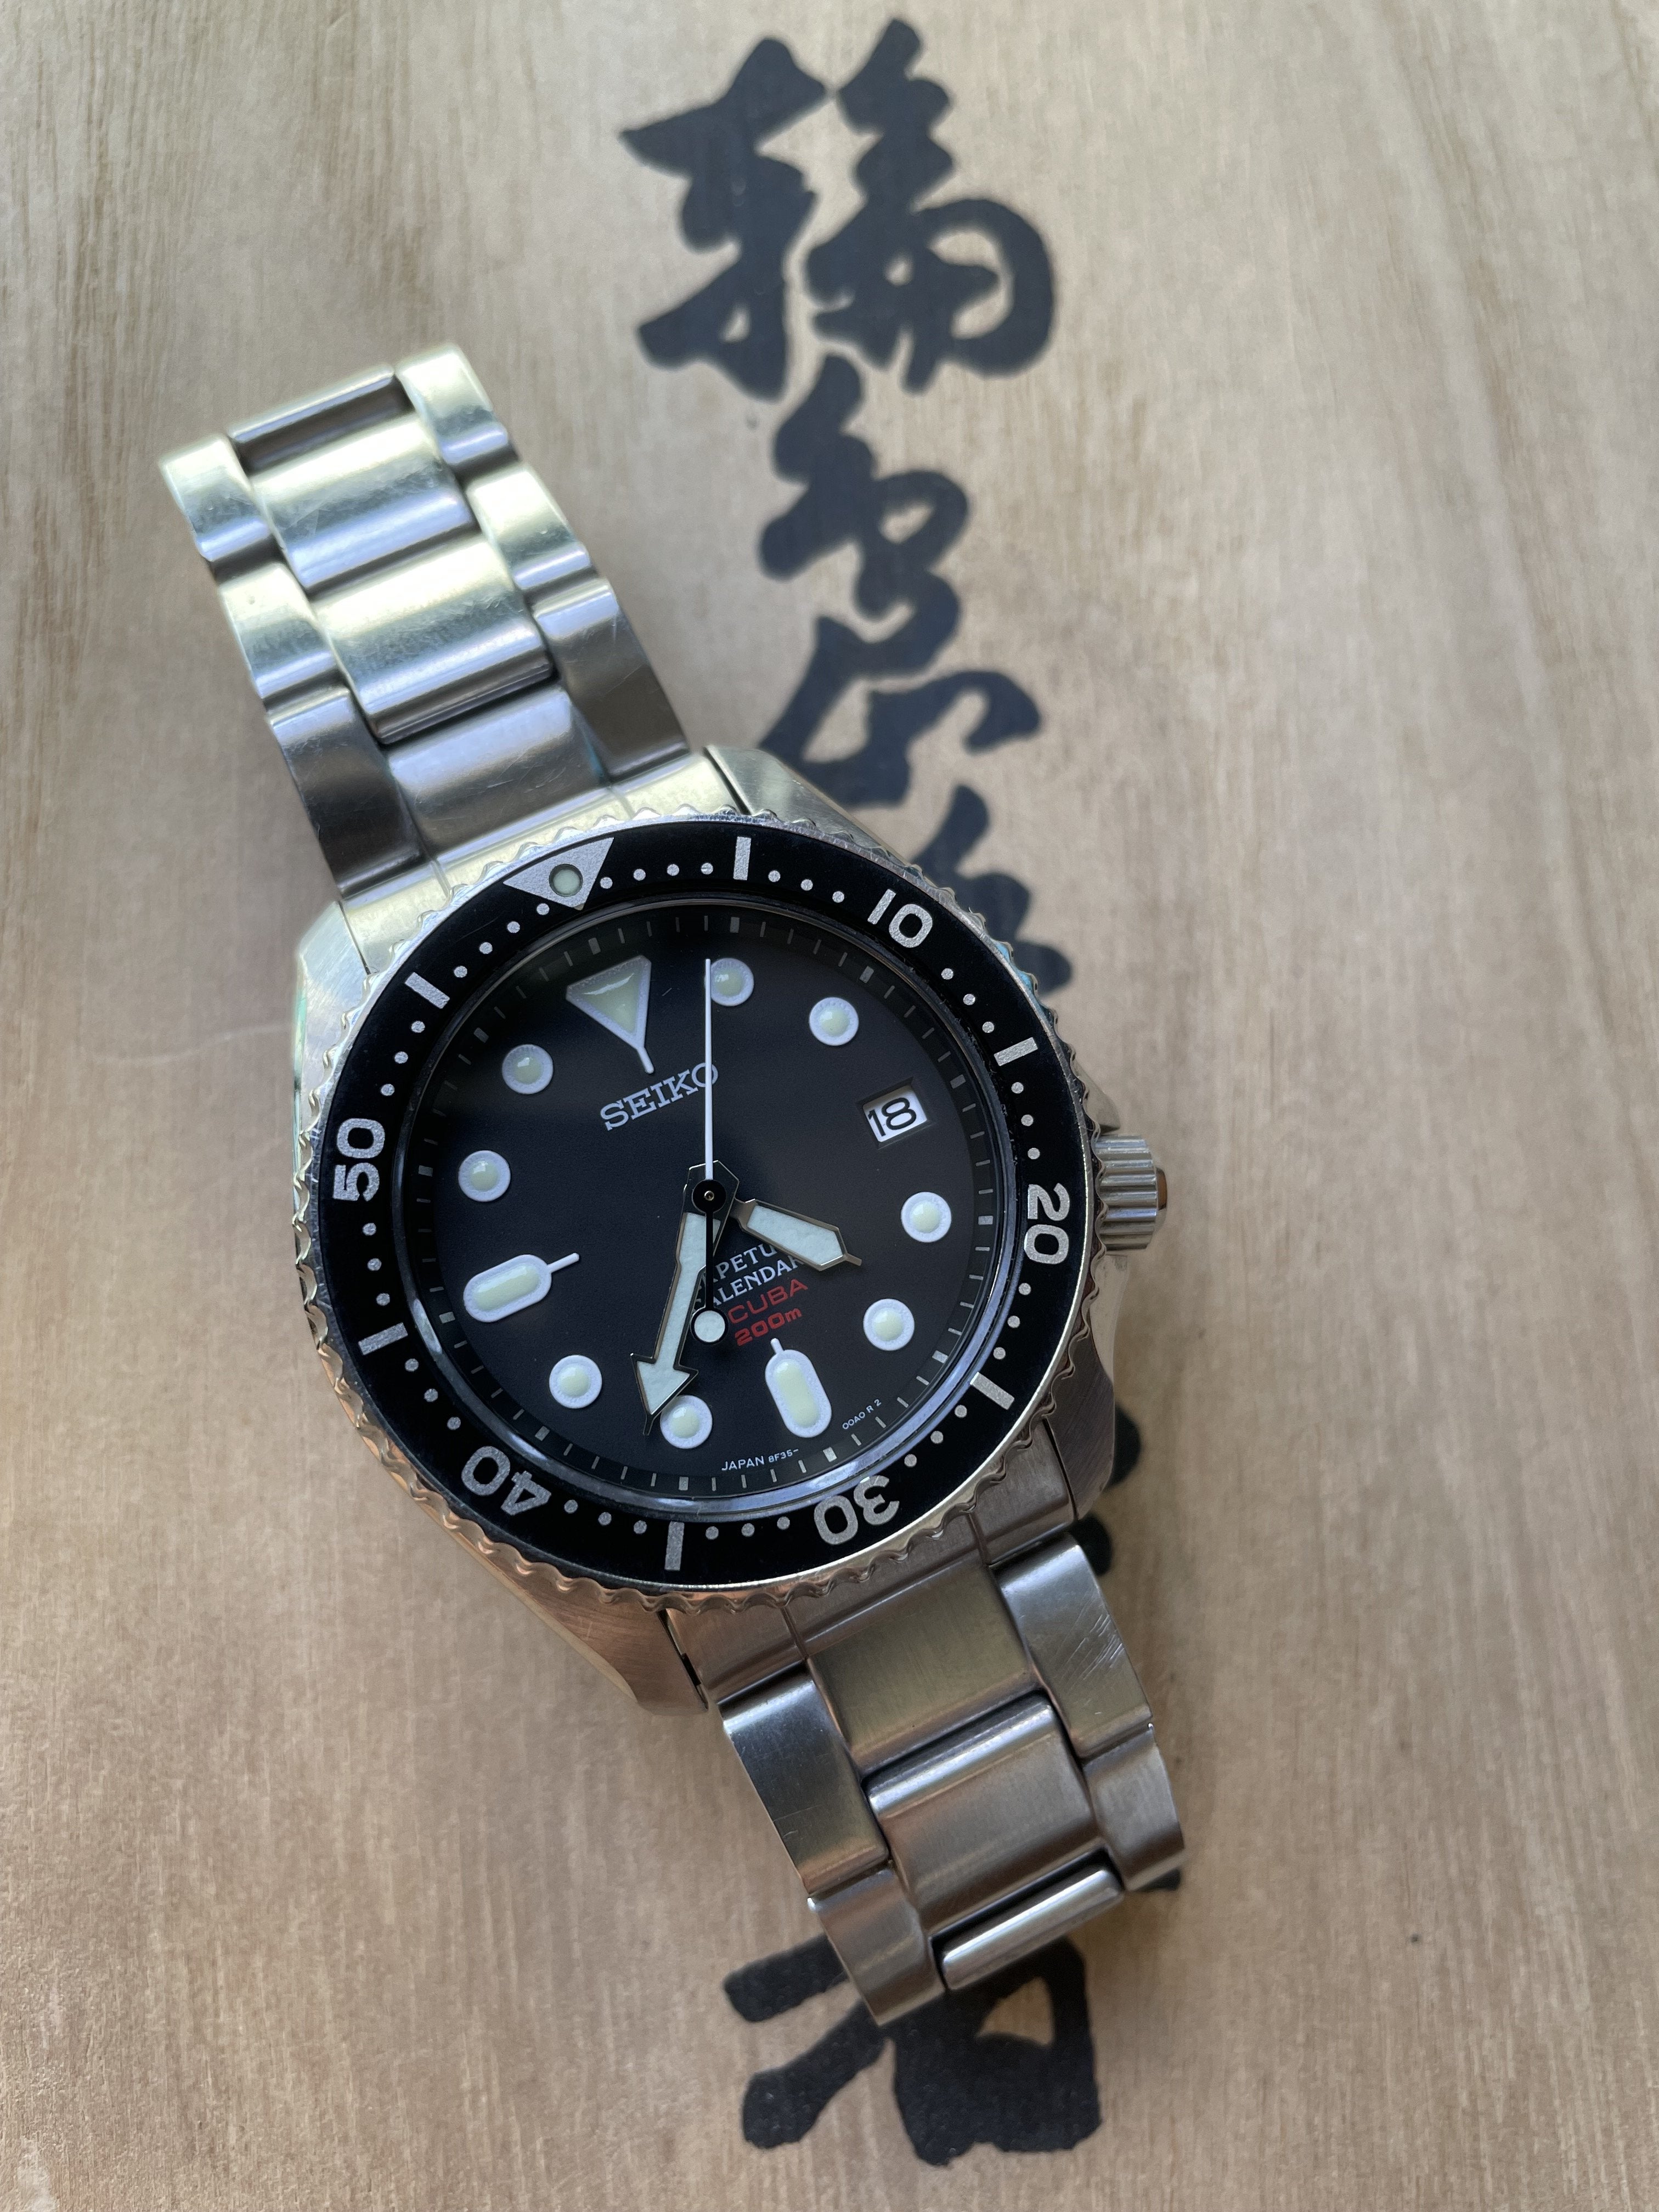 For Sale - Seiko SBCM023 8F35-00A0 Perpetual Calendar Diver SOLD | The  Watch Site